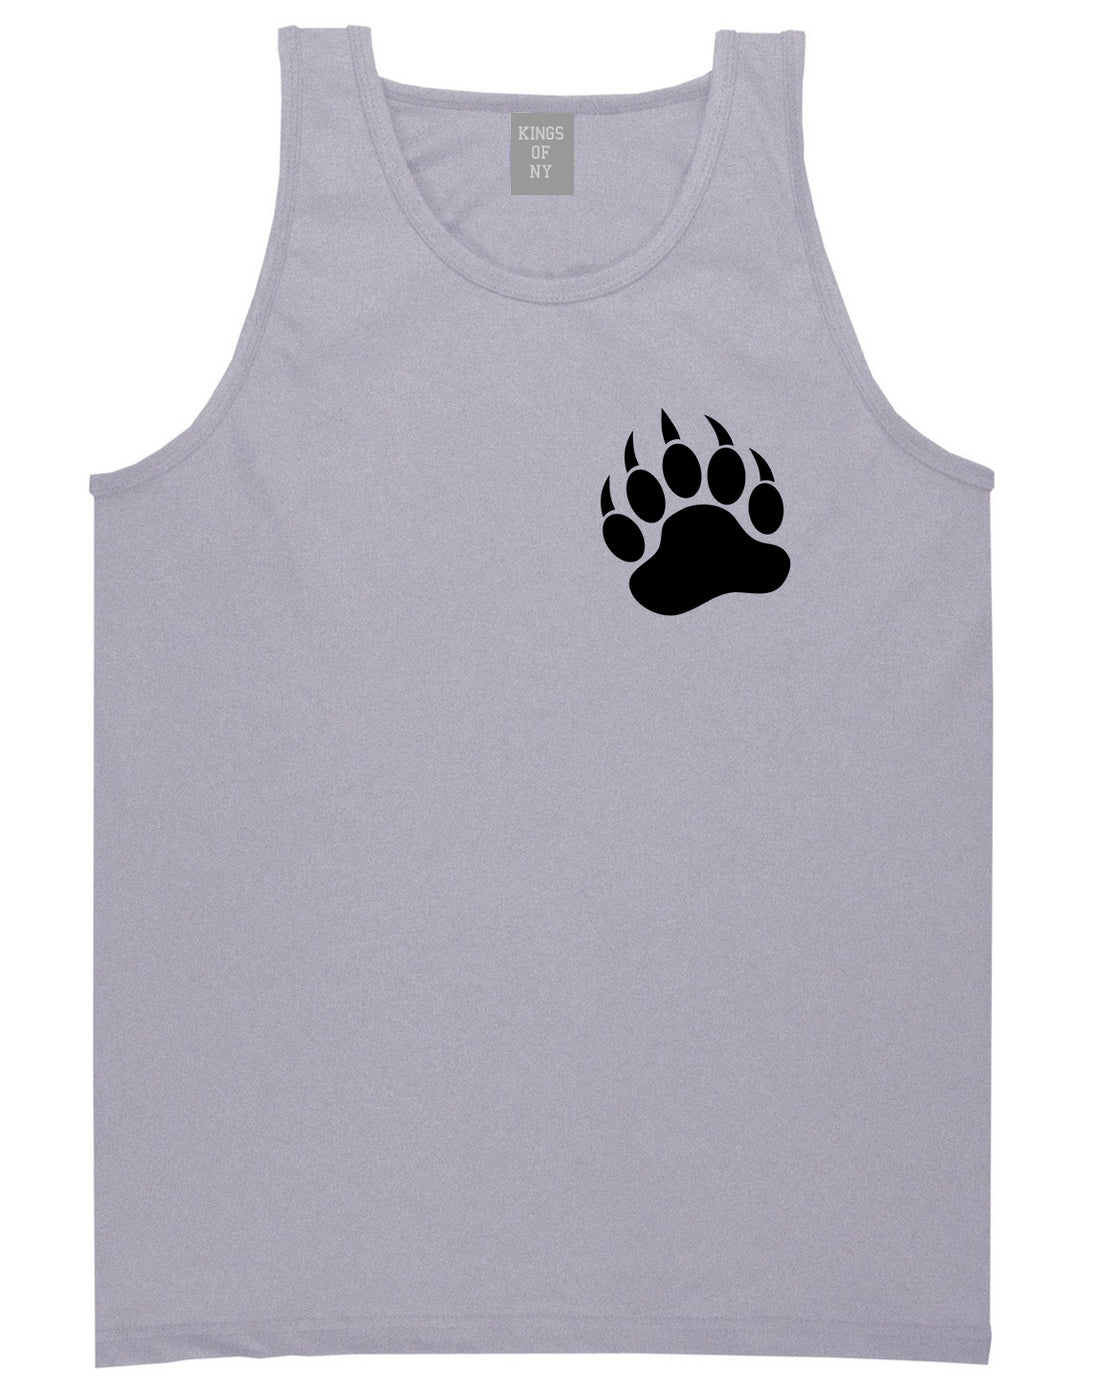 Bear Paws Chest Grey Tank Top Shirt by Kings Of NY